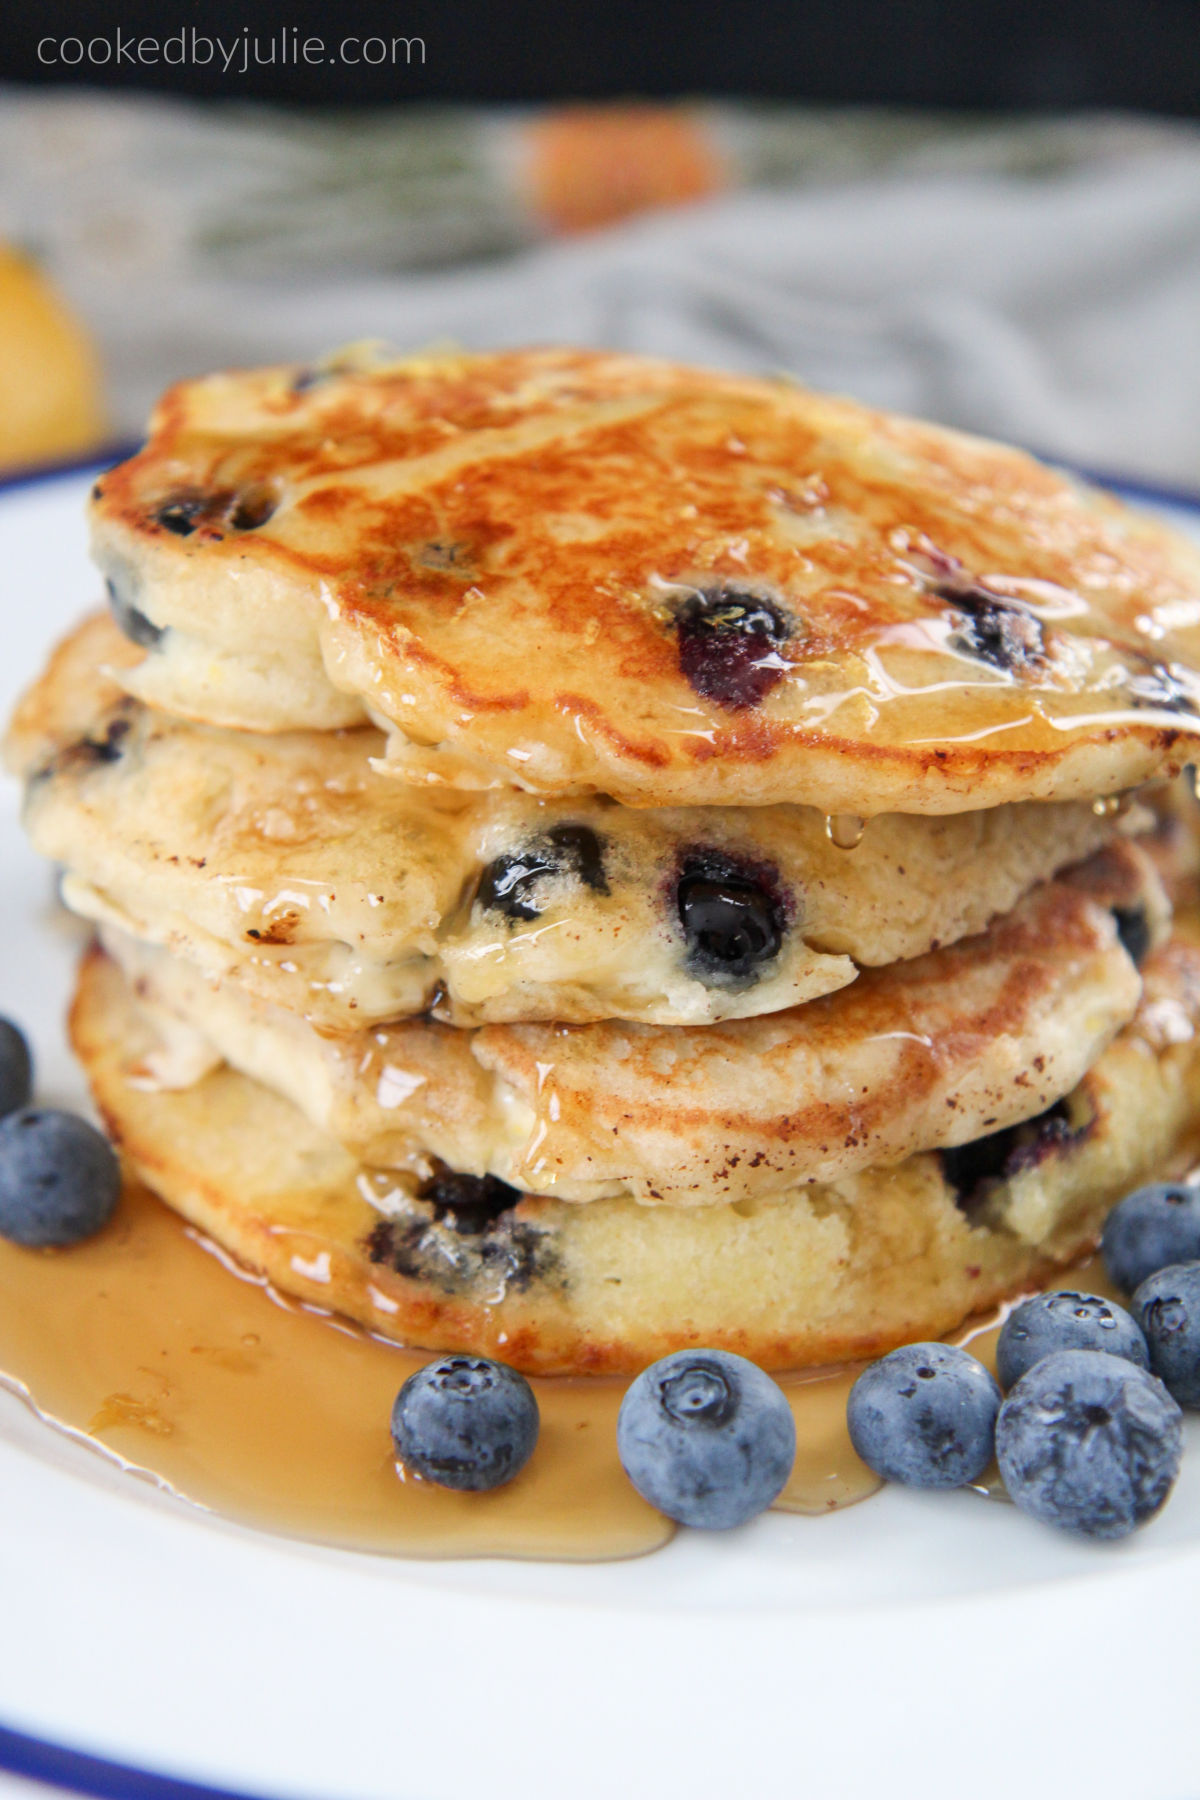 stacked pancakes with syrup and blueberries on the side